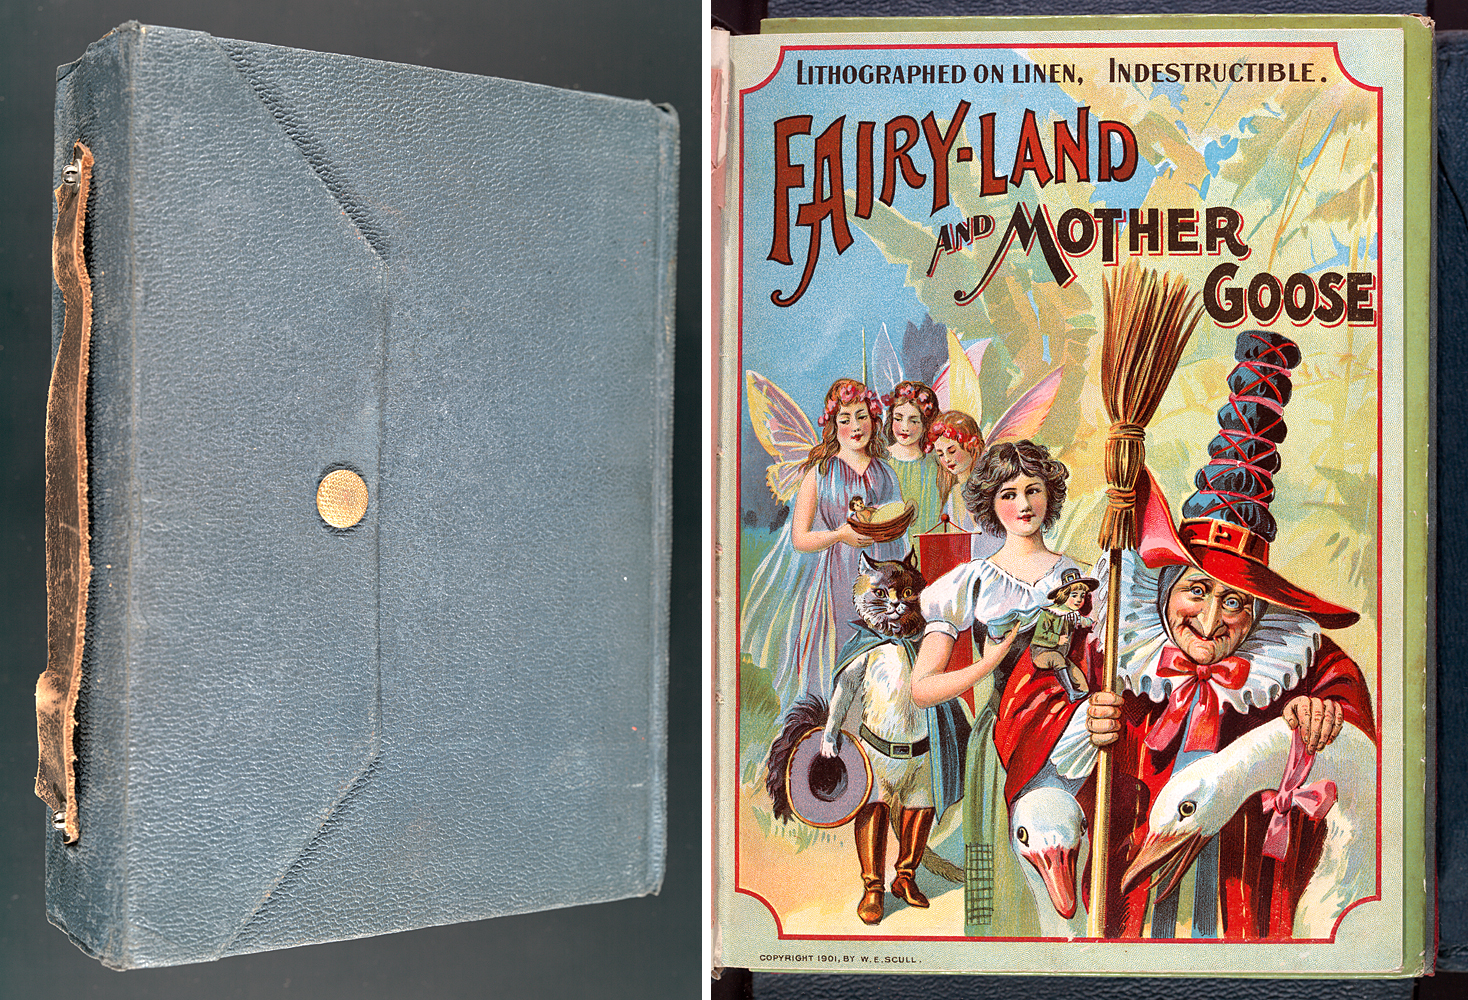 Carrying Box Exterior Packaging and colored illustrated cover for Fairy-Land and Mother Goose, featuring various fairytale characters like puss in boots, mother goose, and tom thumb